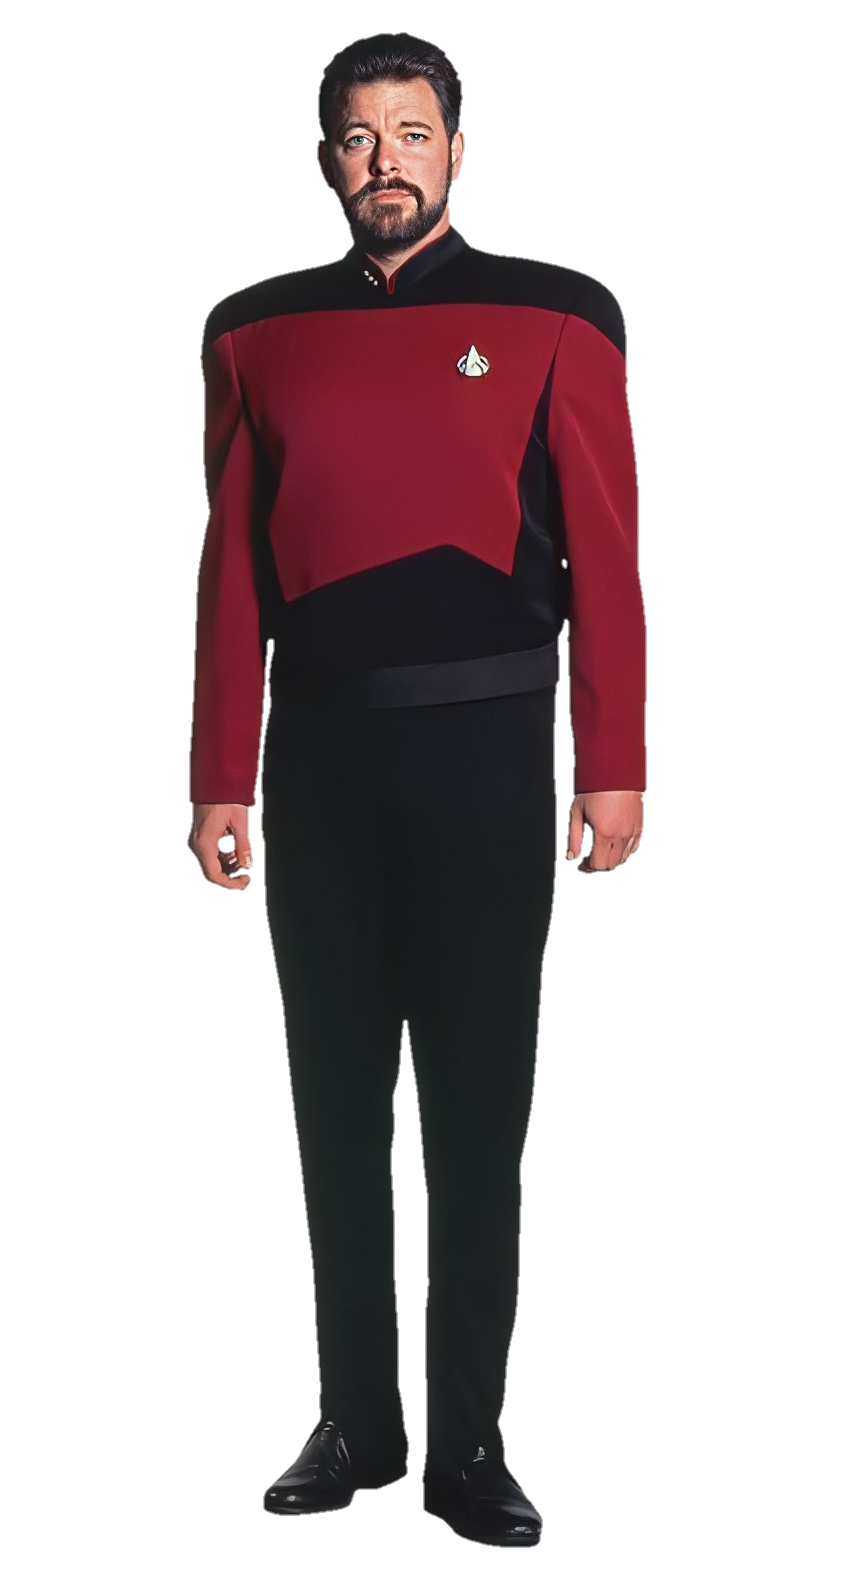 High Quality Will Riker Transparent Background Blank Meme Template